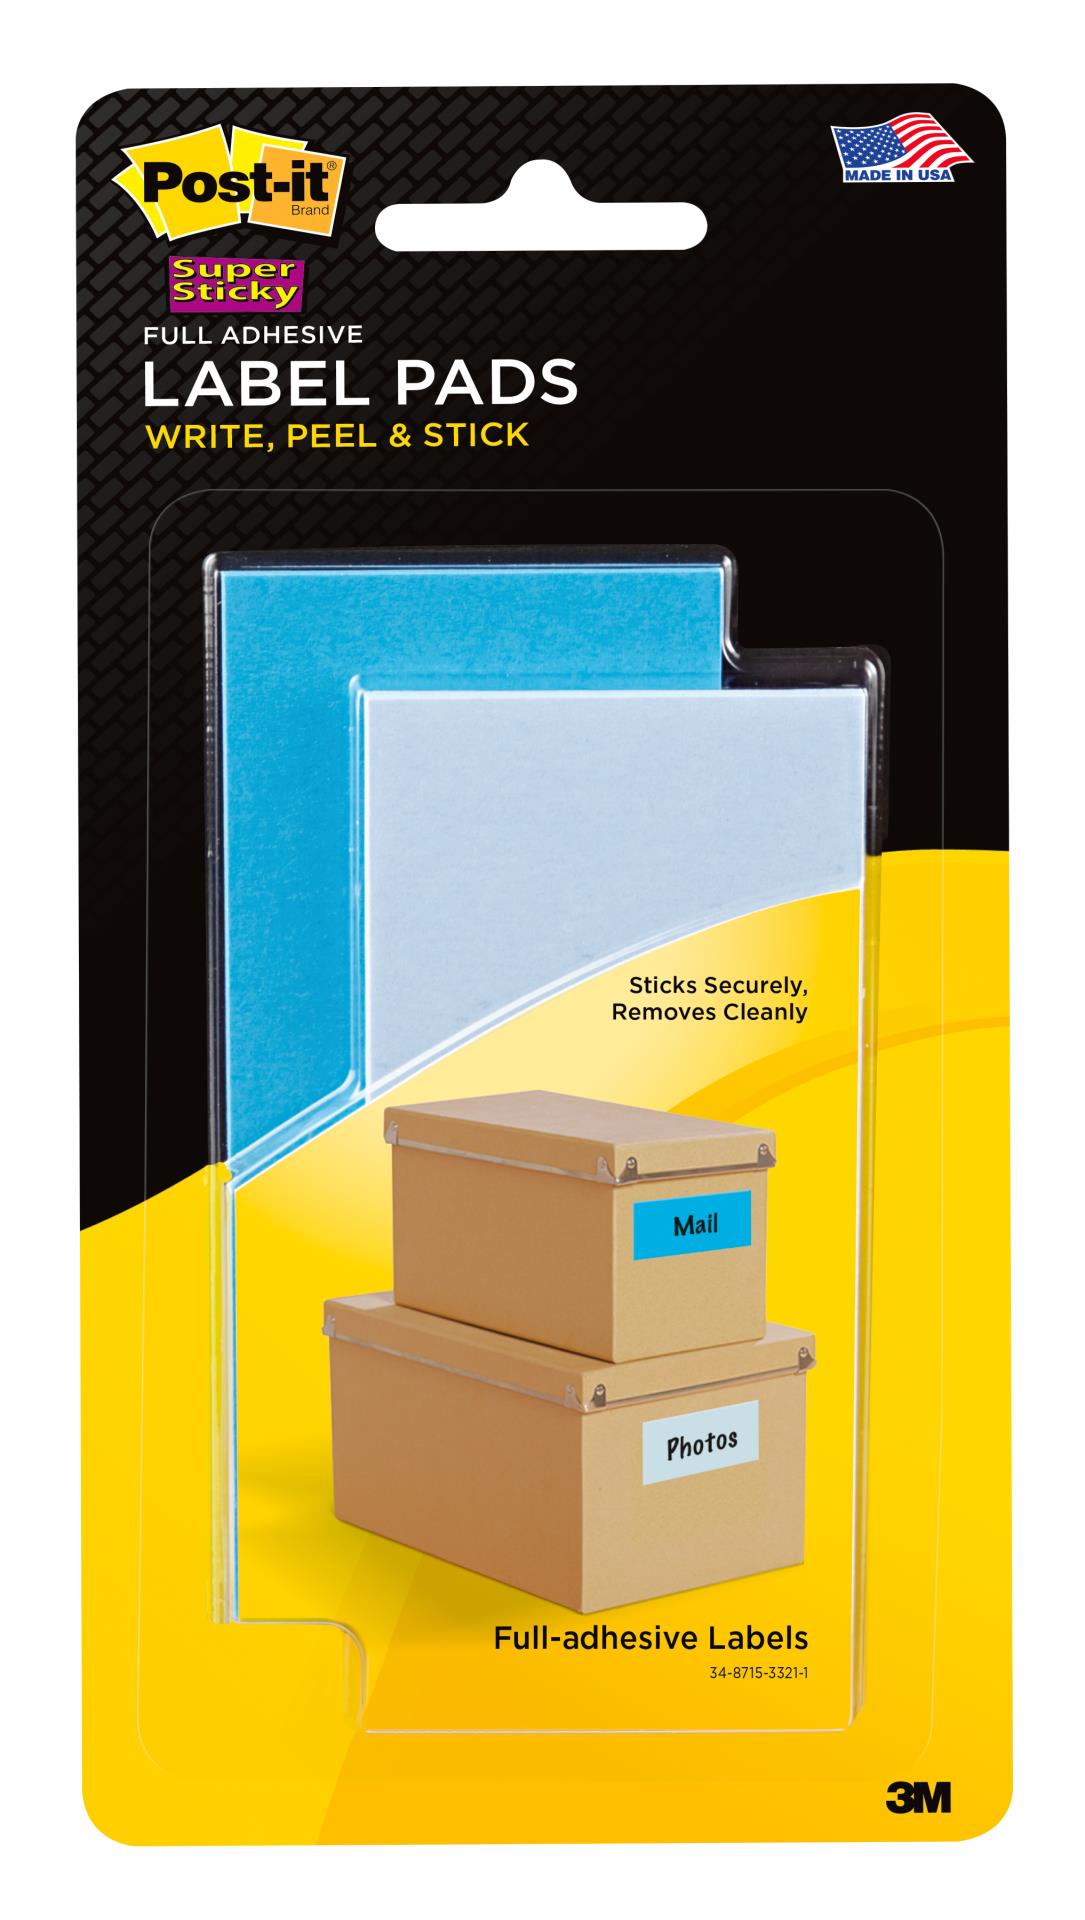 7010372360 - Post-it® Label Pads 2900-BLB, 2 in. x 4 in. (50,8 mm x 101 mm), Removable, 2 in. x 4 in, Mediterranean Blue and Cloud Blue, 25 Labels/Pad, 2 Pads/Pack